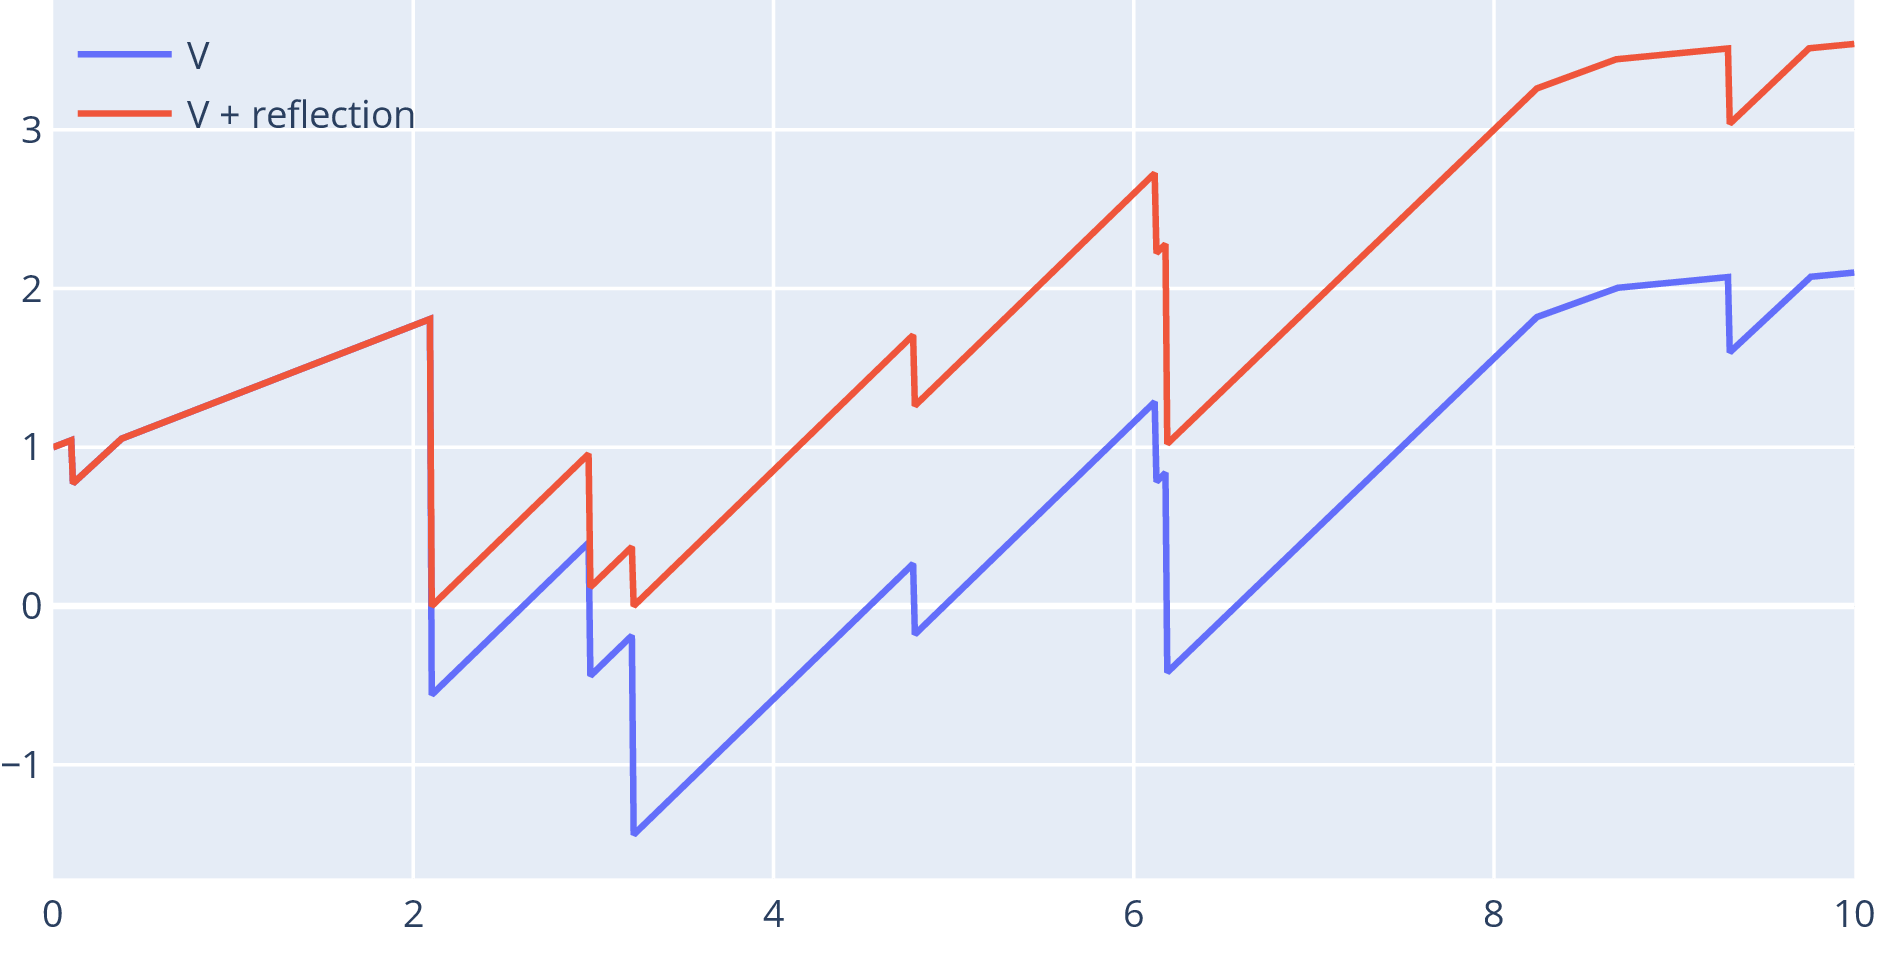 Plot with a blue (V) and red (V + reflection) series. The blue series is the tax
process V we have seen. The red series is the same, except that when it would
go below zero by a jump, it instead moves to zero and continues.